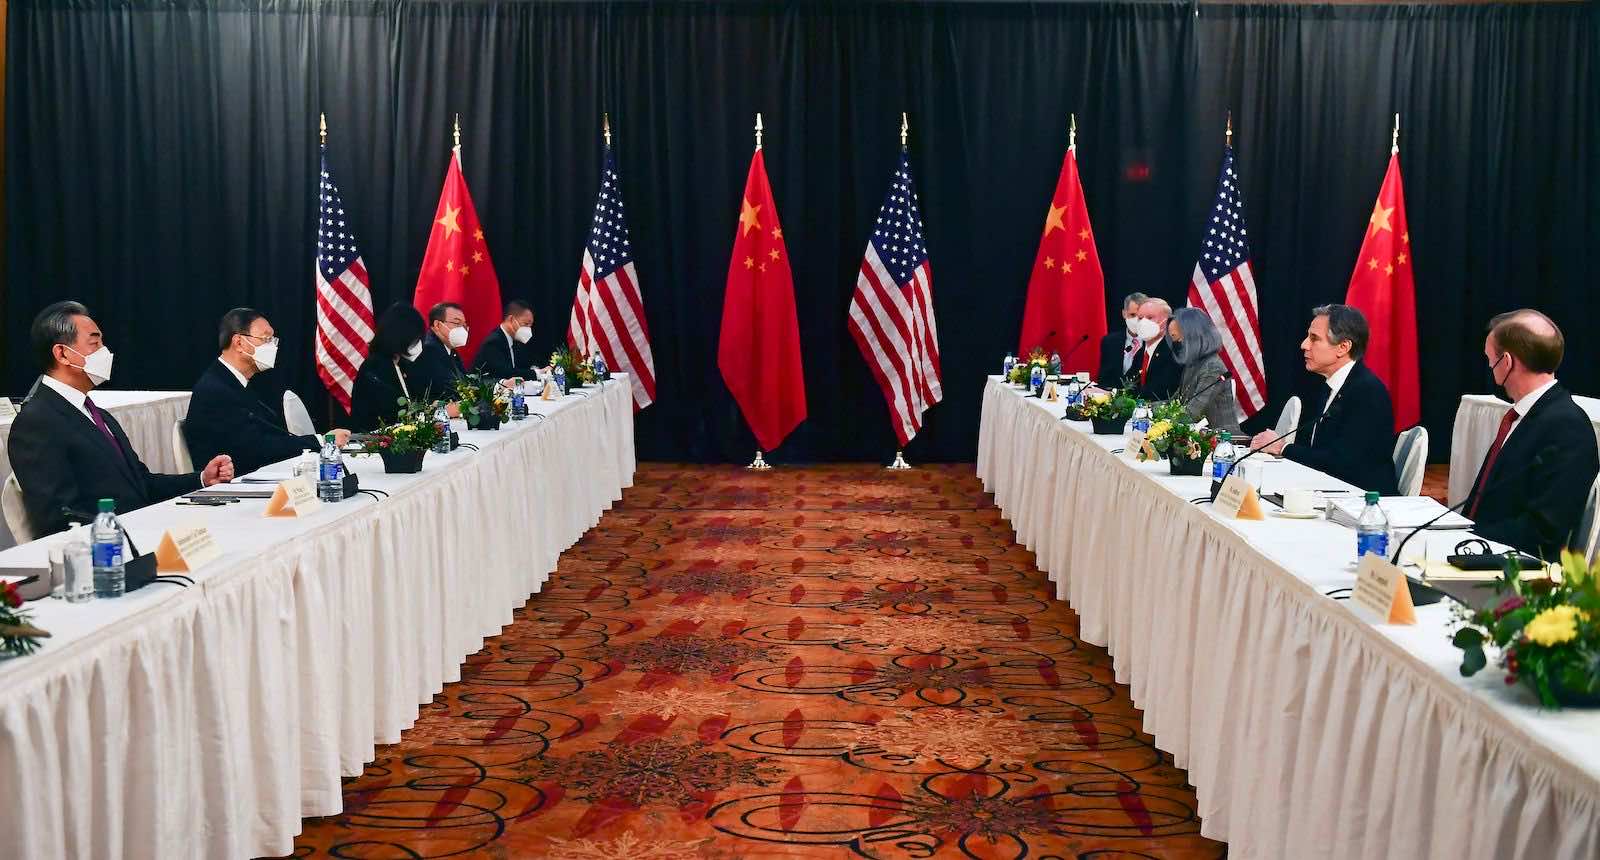 The opening session of US-China talks at the Captain Cook Hotel in Anchorage, Alaska, 18 March 2021 (Frederic J. Brown/AFP via Getty Images)